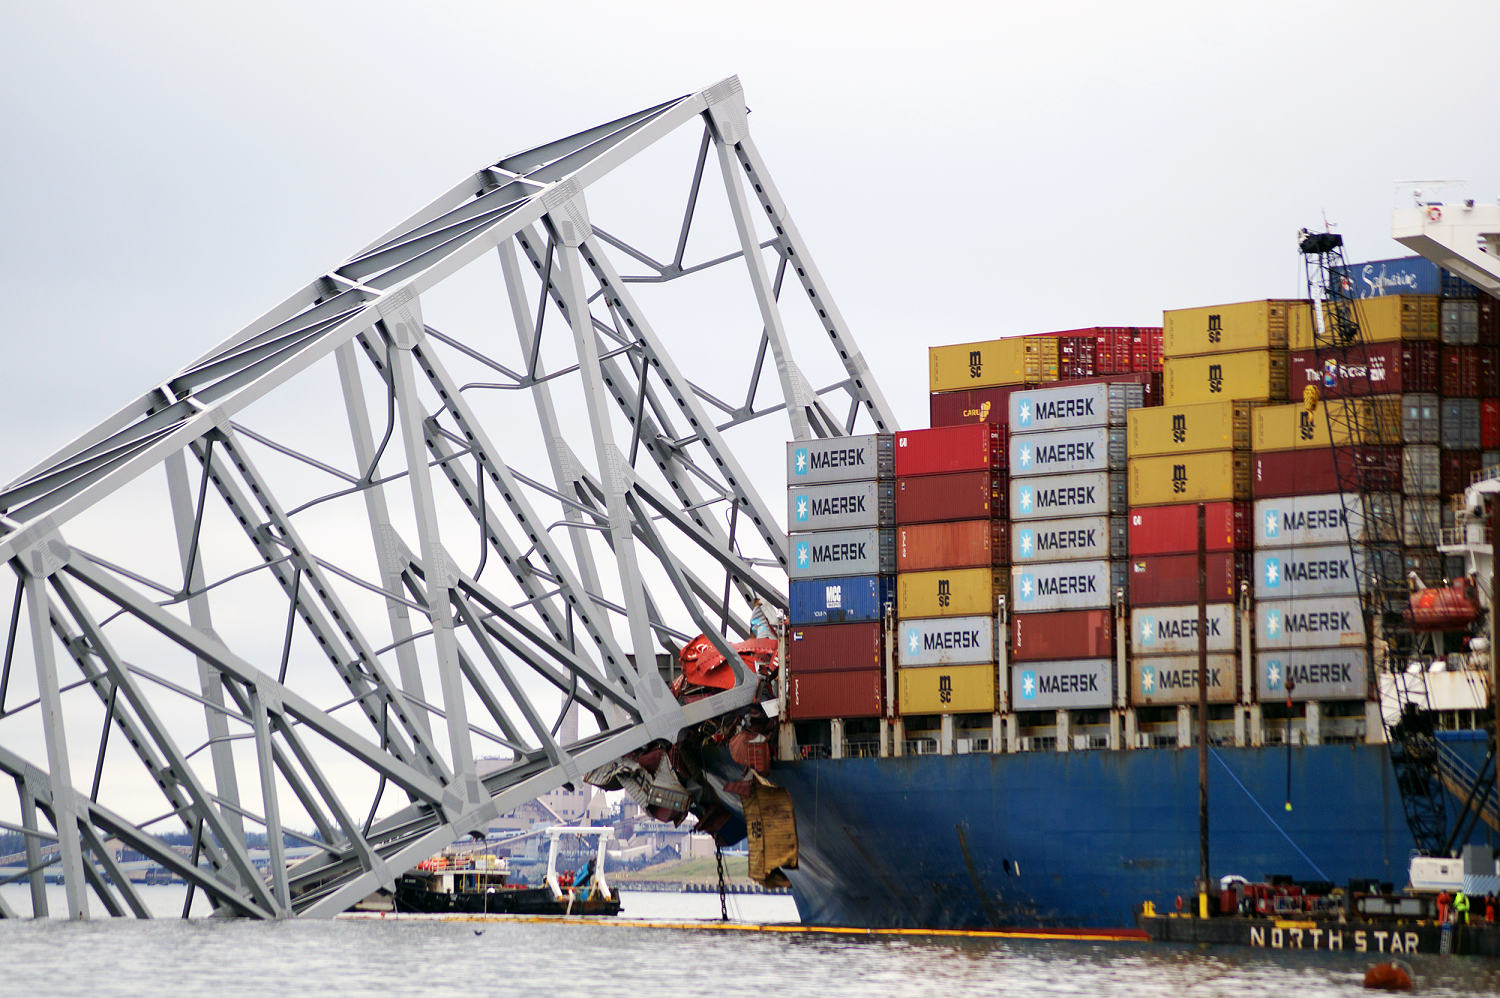 Container ship set to be removed 8 weeks after catastrophic Francis Scott Key Bridge crash in Baltimore